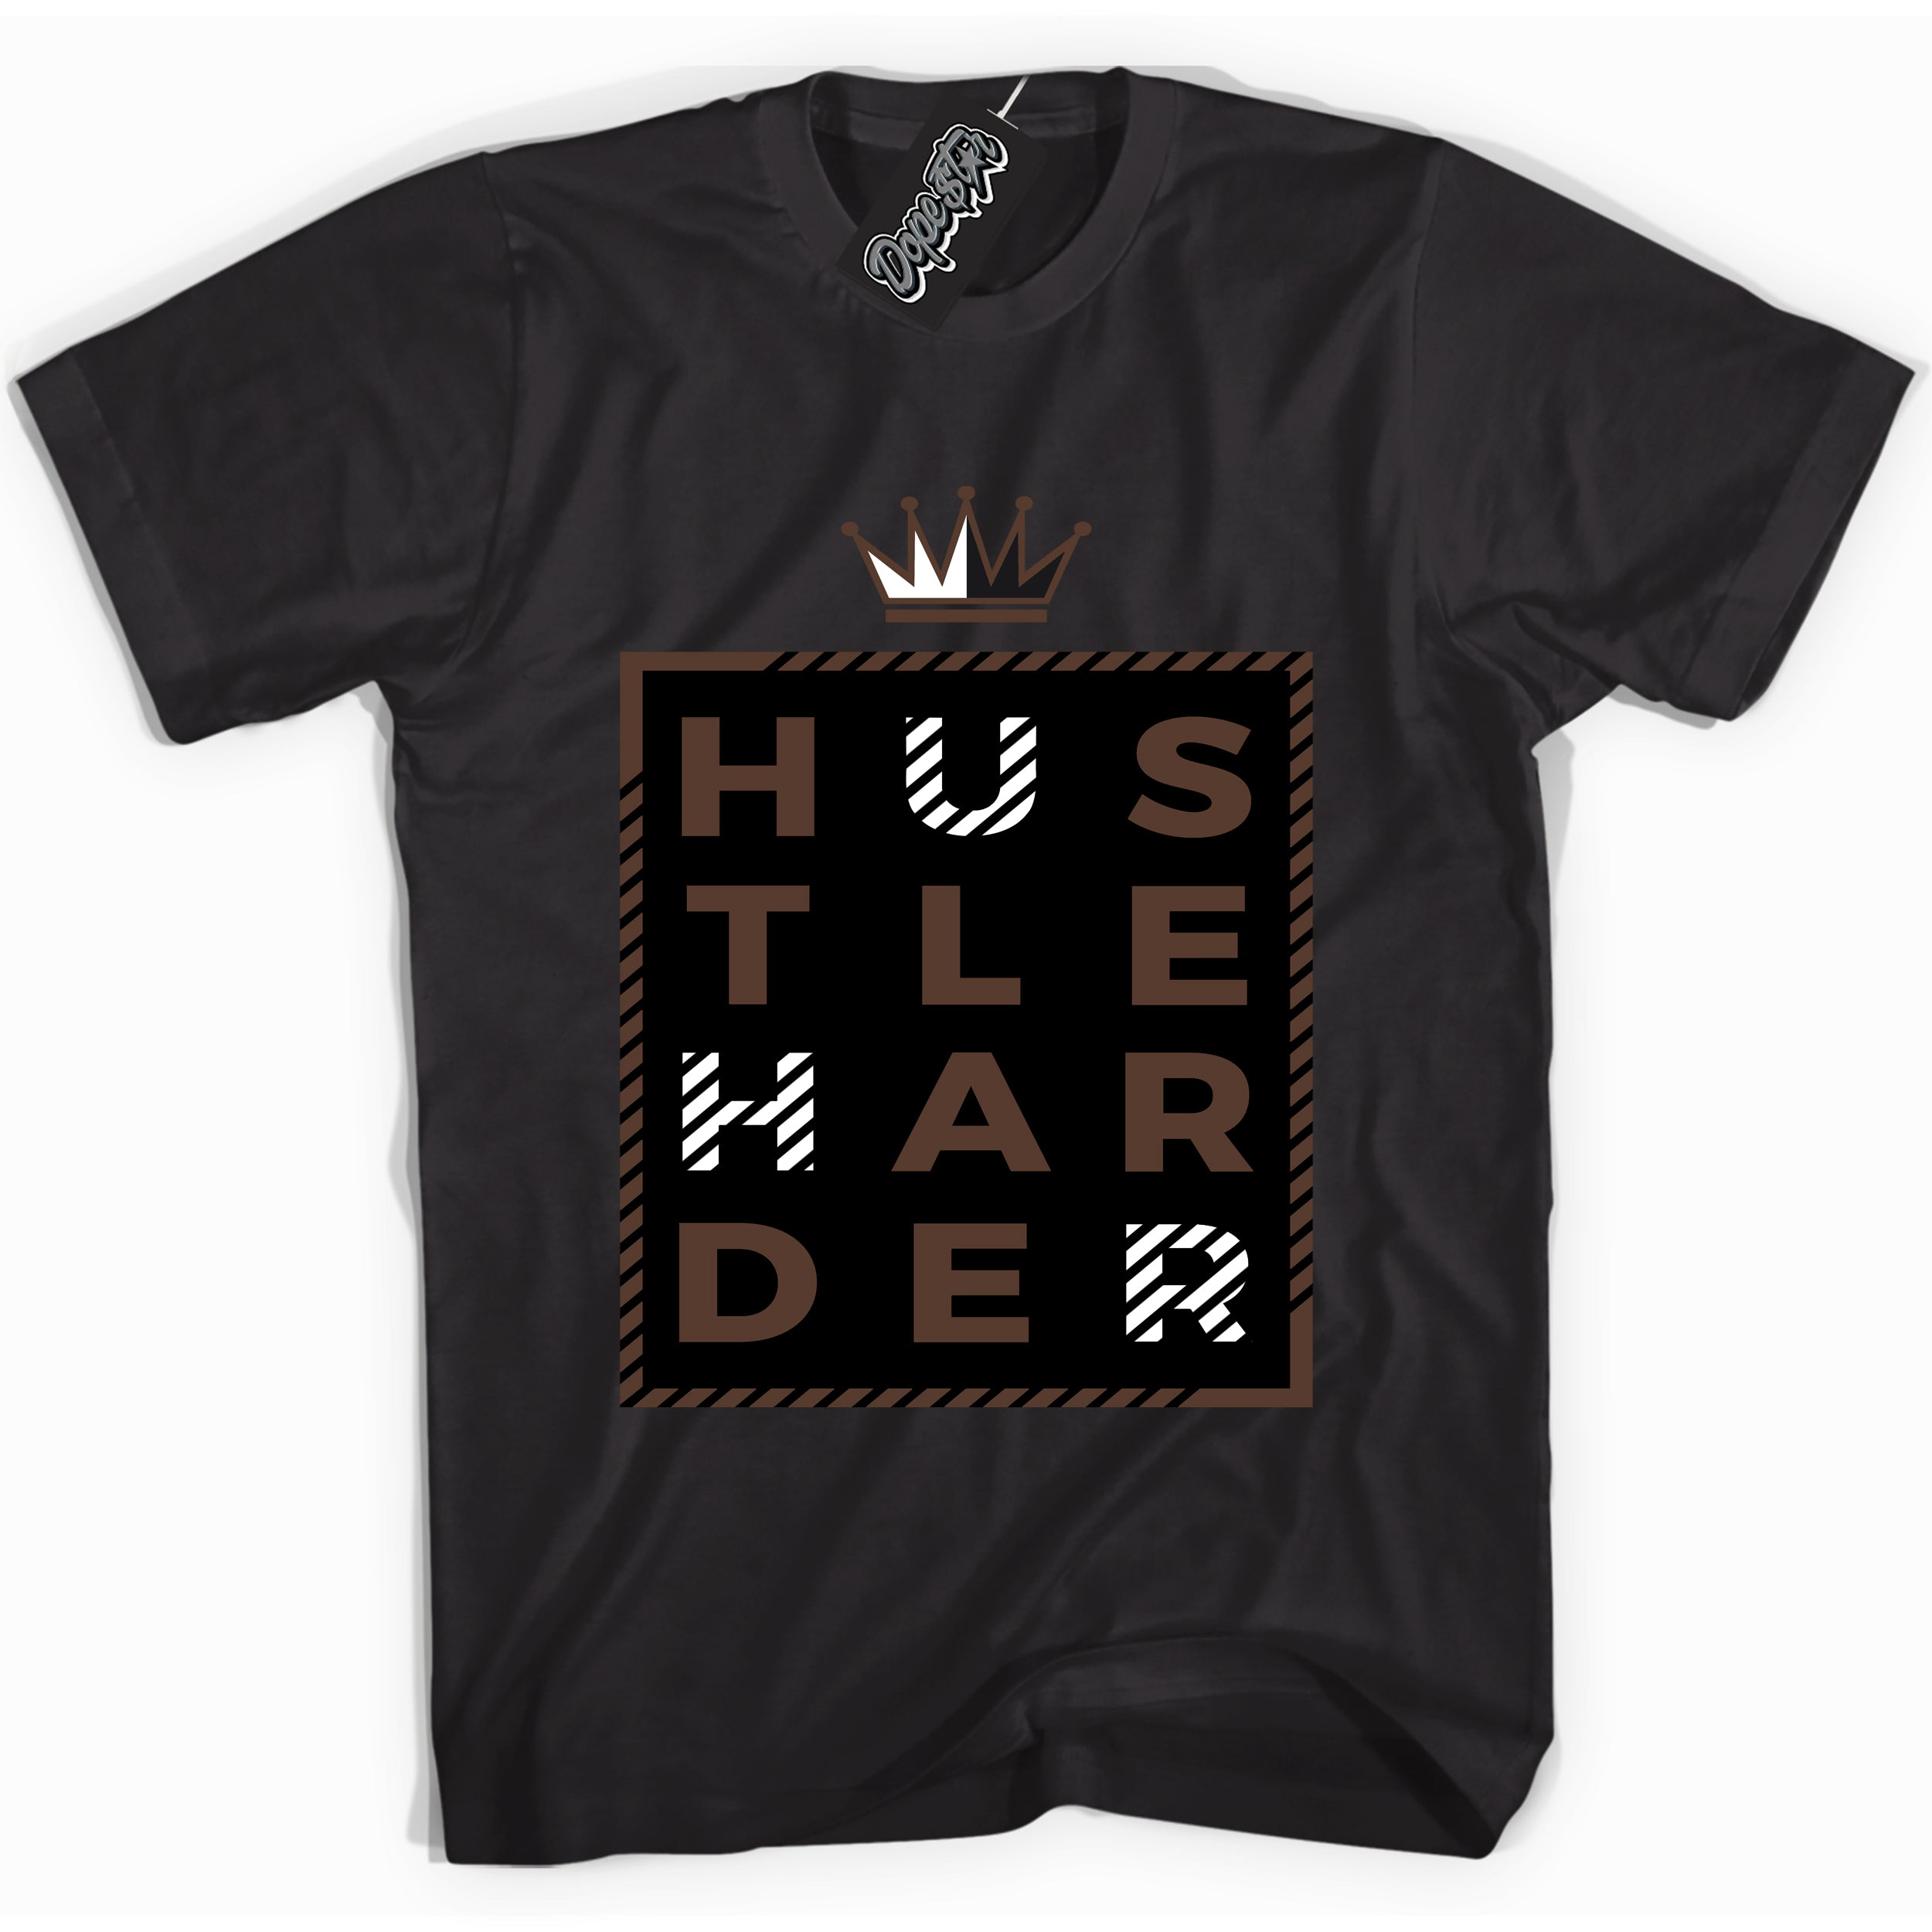 Cool Black graphic tee with “ Hustle Harder ” design, that perfectly matches Palomino 1s sneakers 